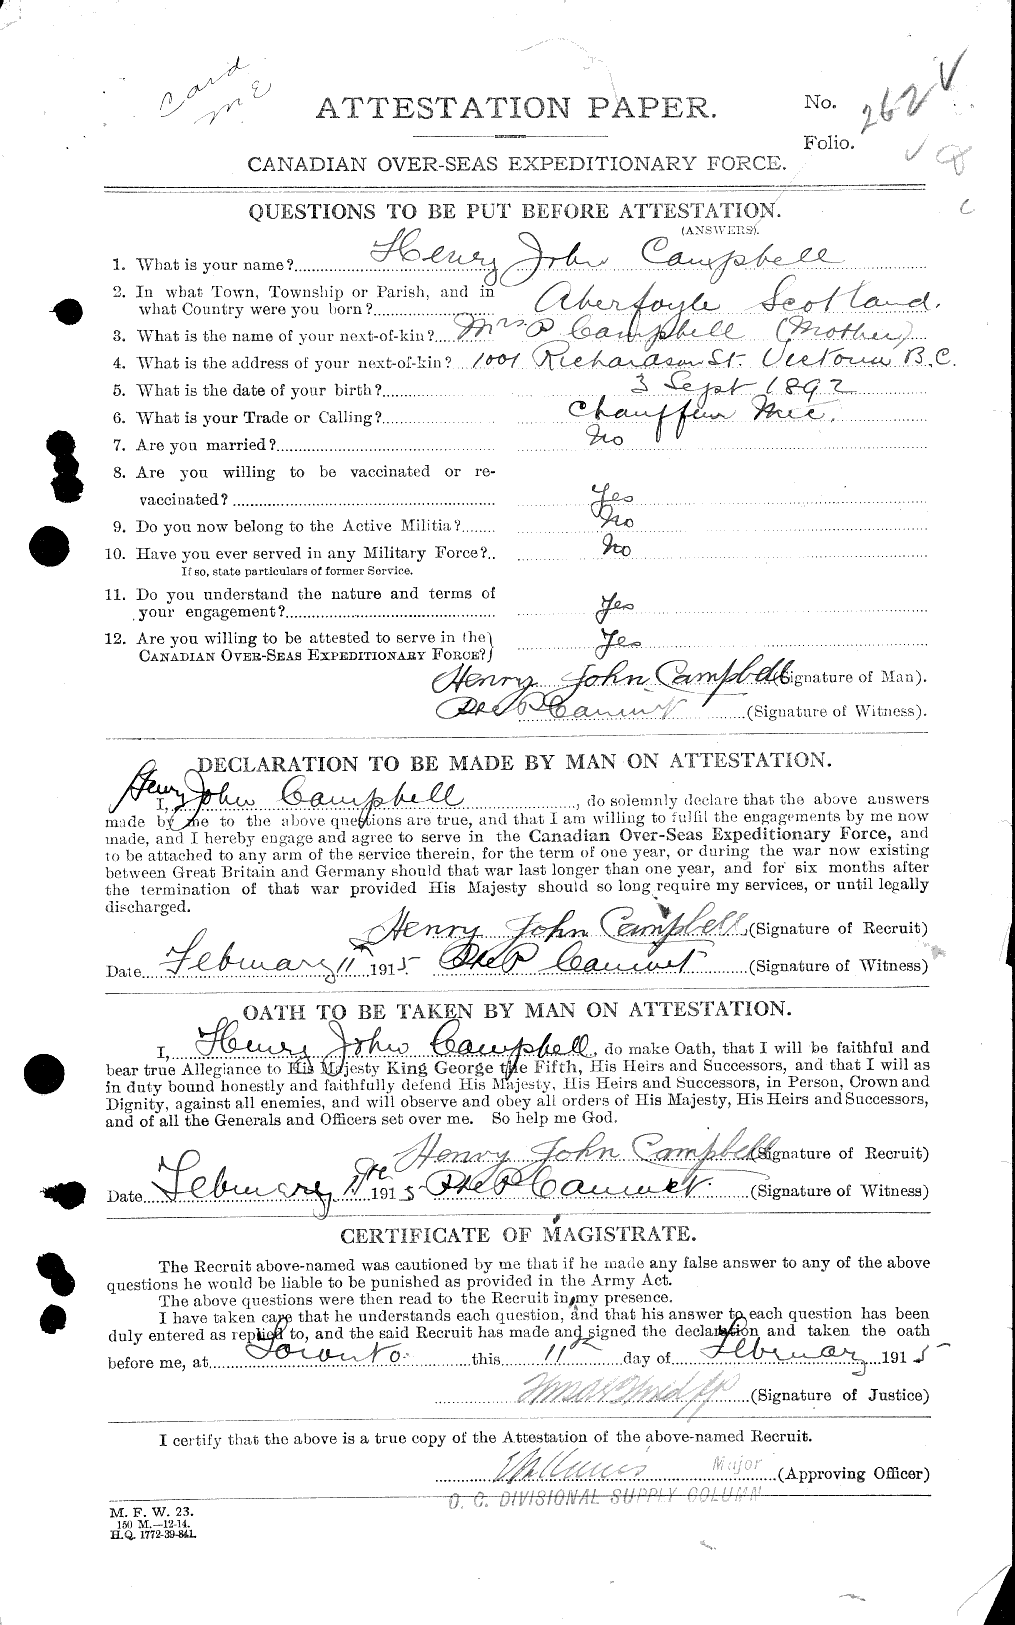 Personnel Records of the First World War - CEF 008415a